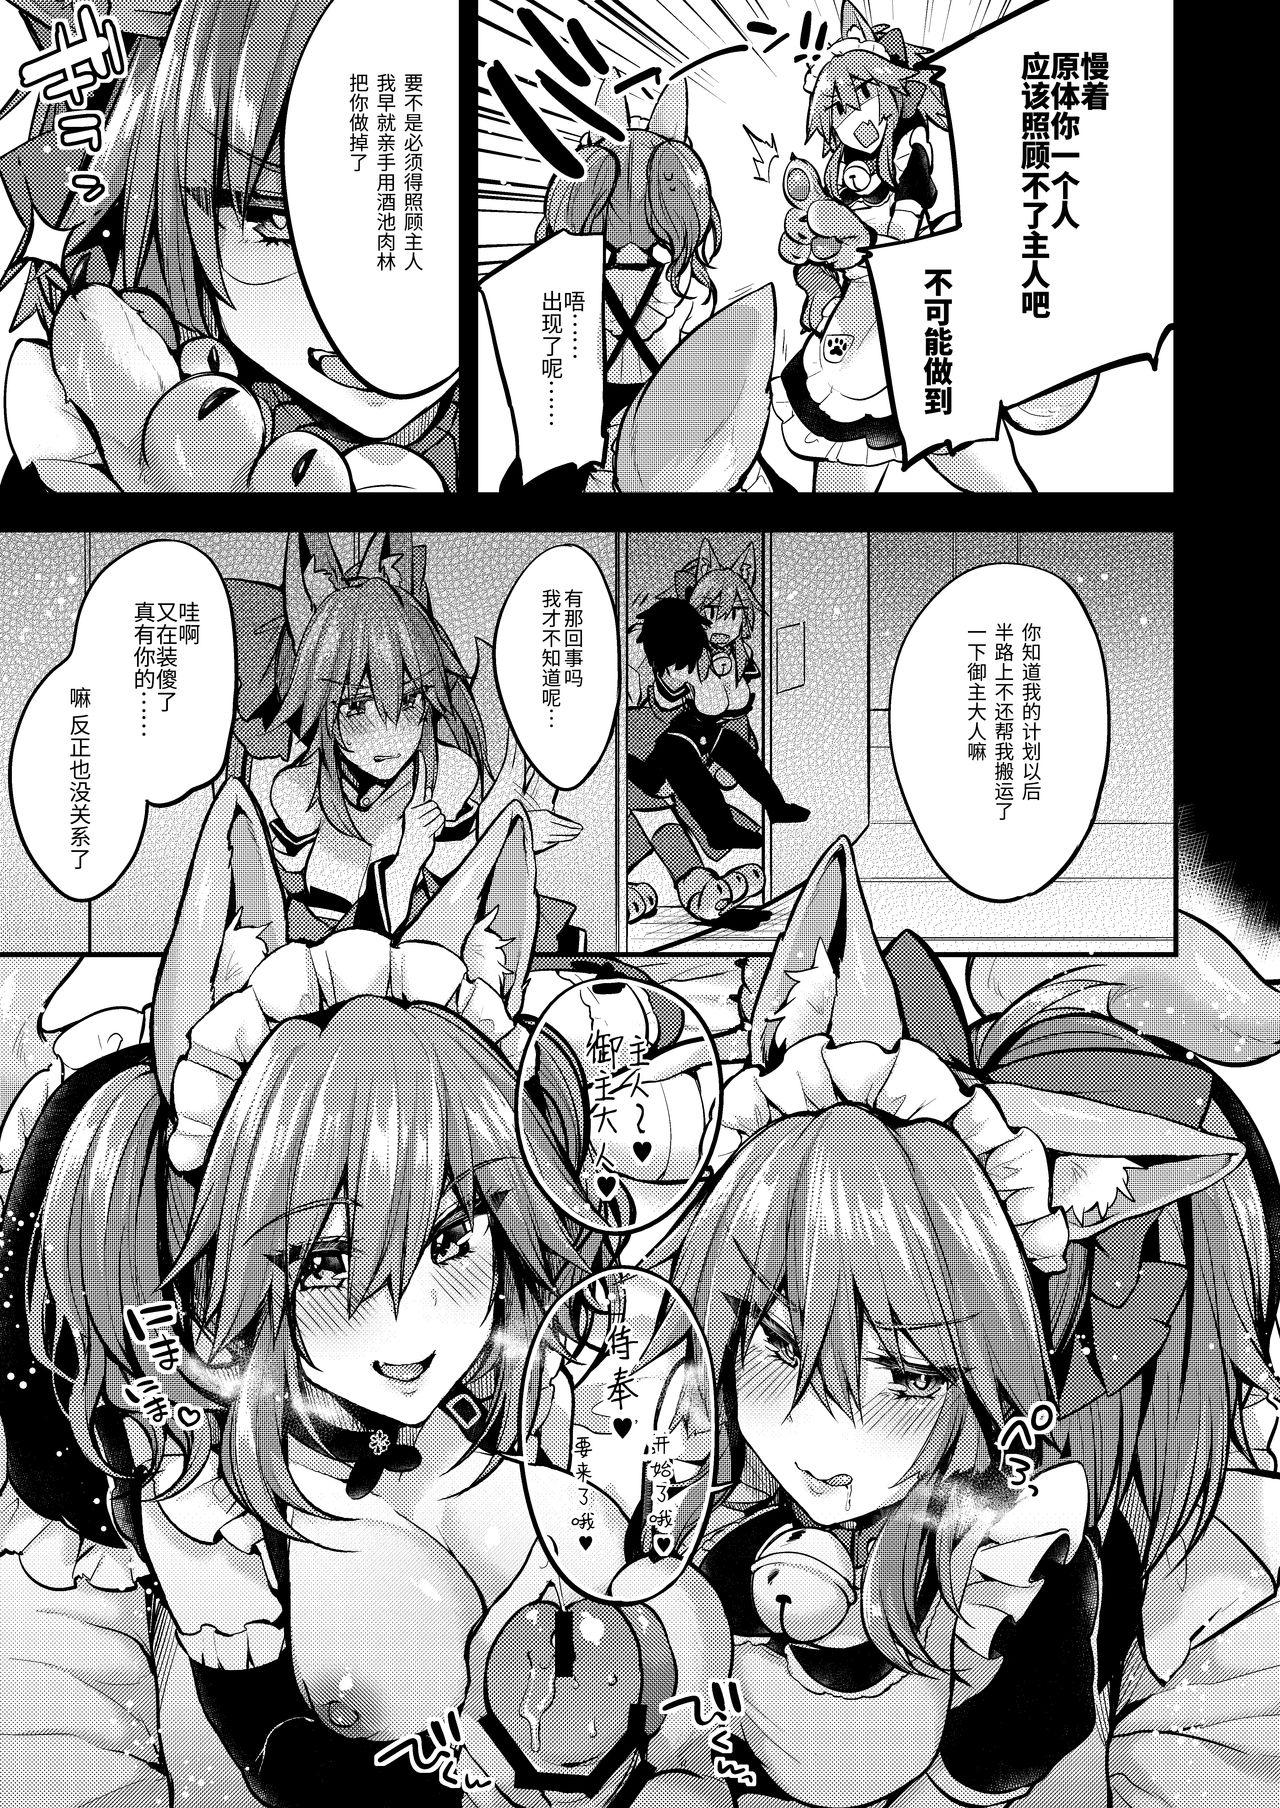 Cums Maid Service Double Fox - Fate grand order Teenxxx - Page 4